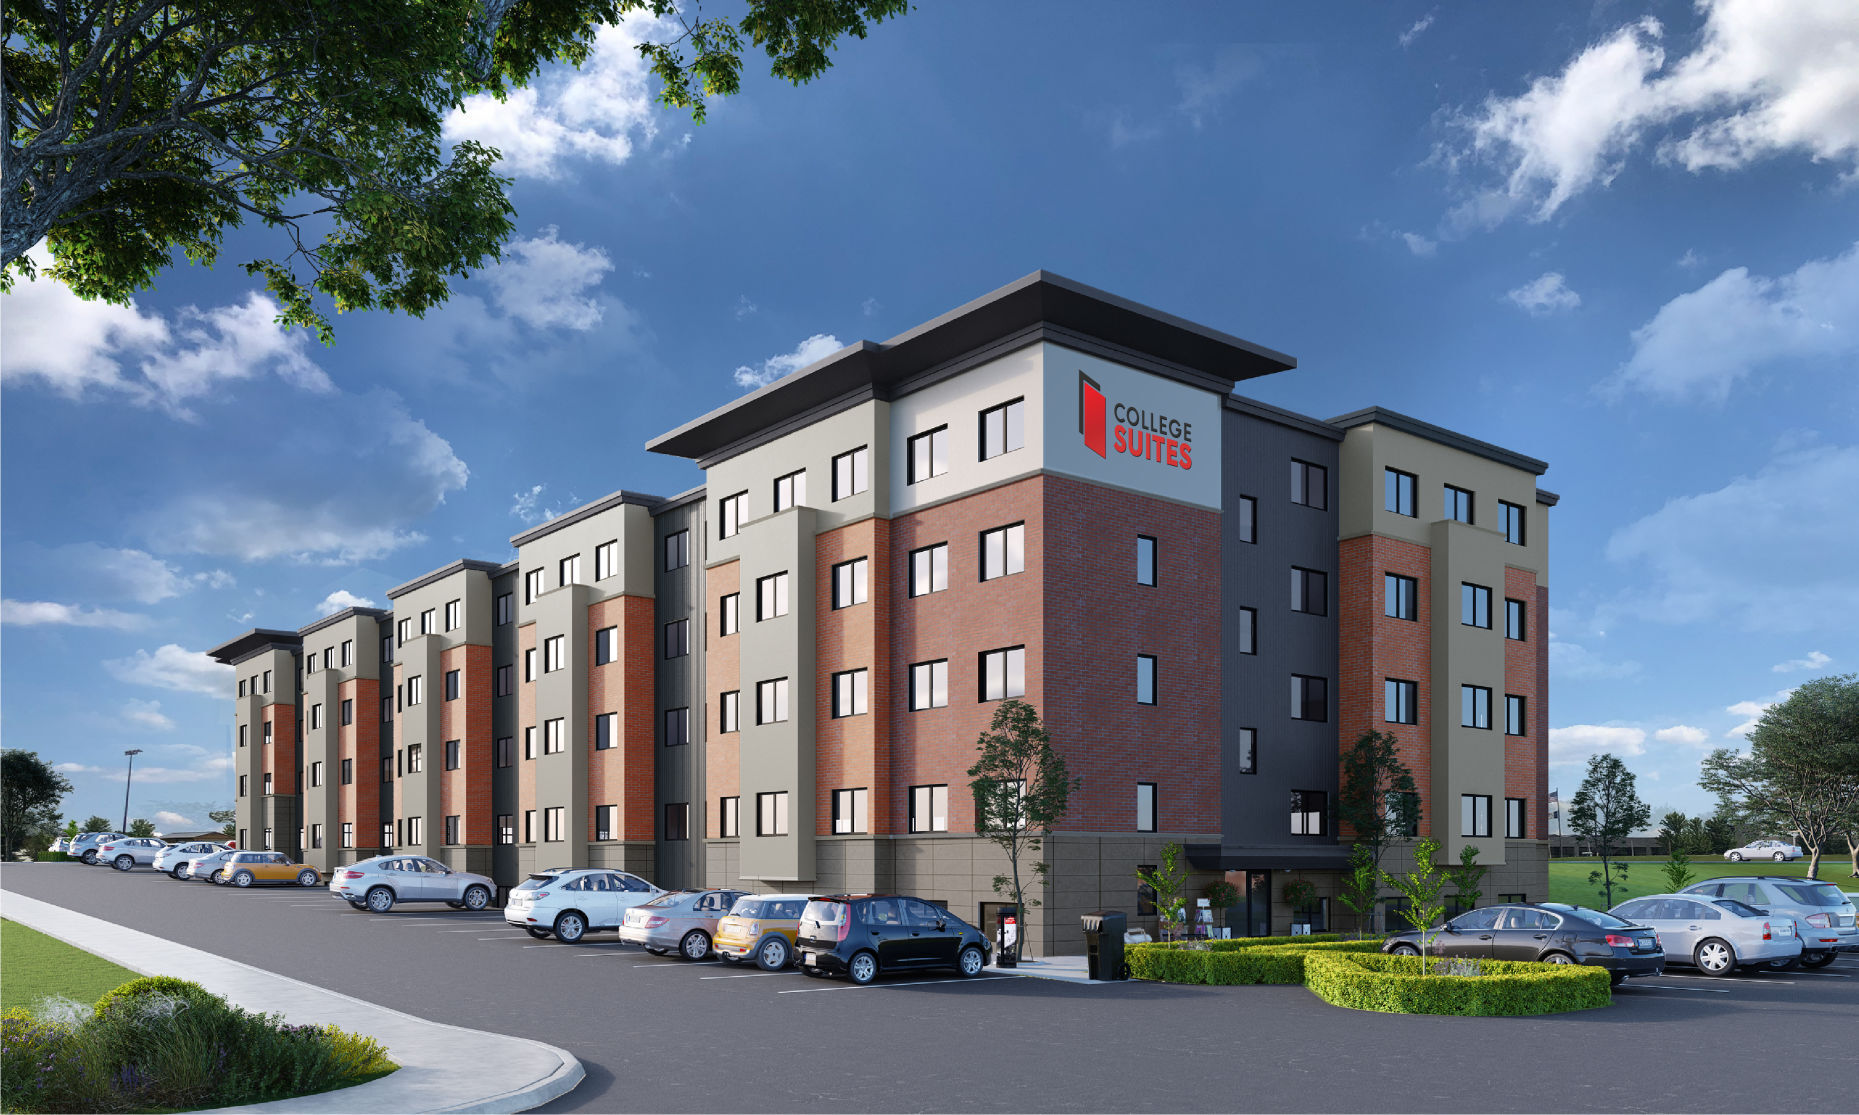 A rendering of the new College Suites apartment complex in Peosta, Iowa.  PHOTO CREDIT: Contributed